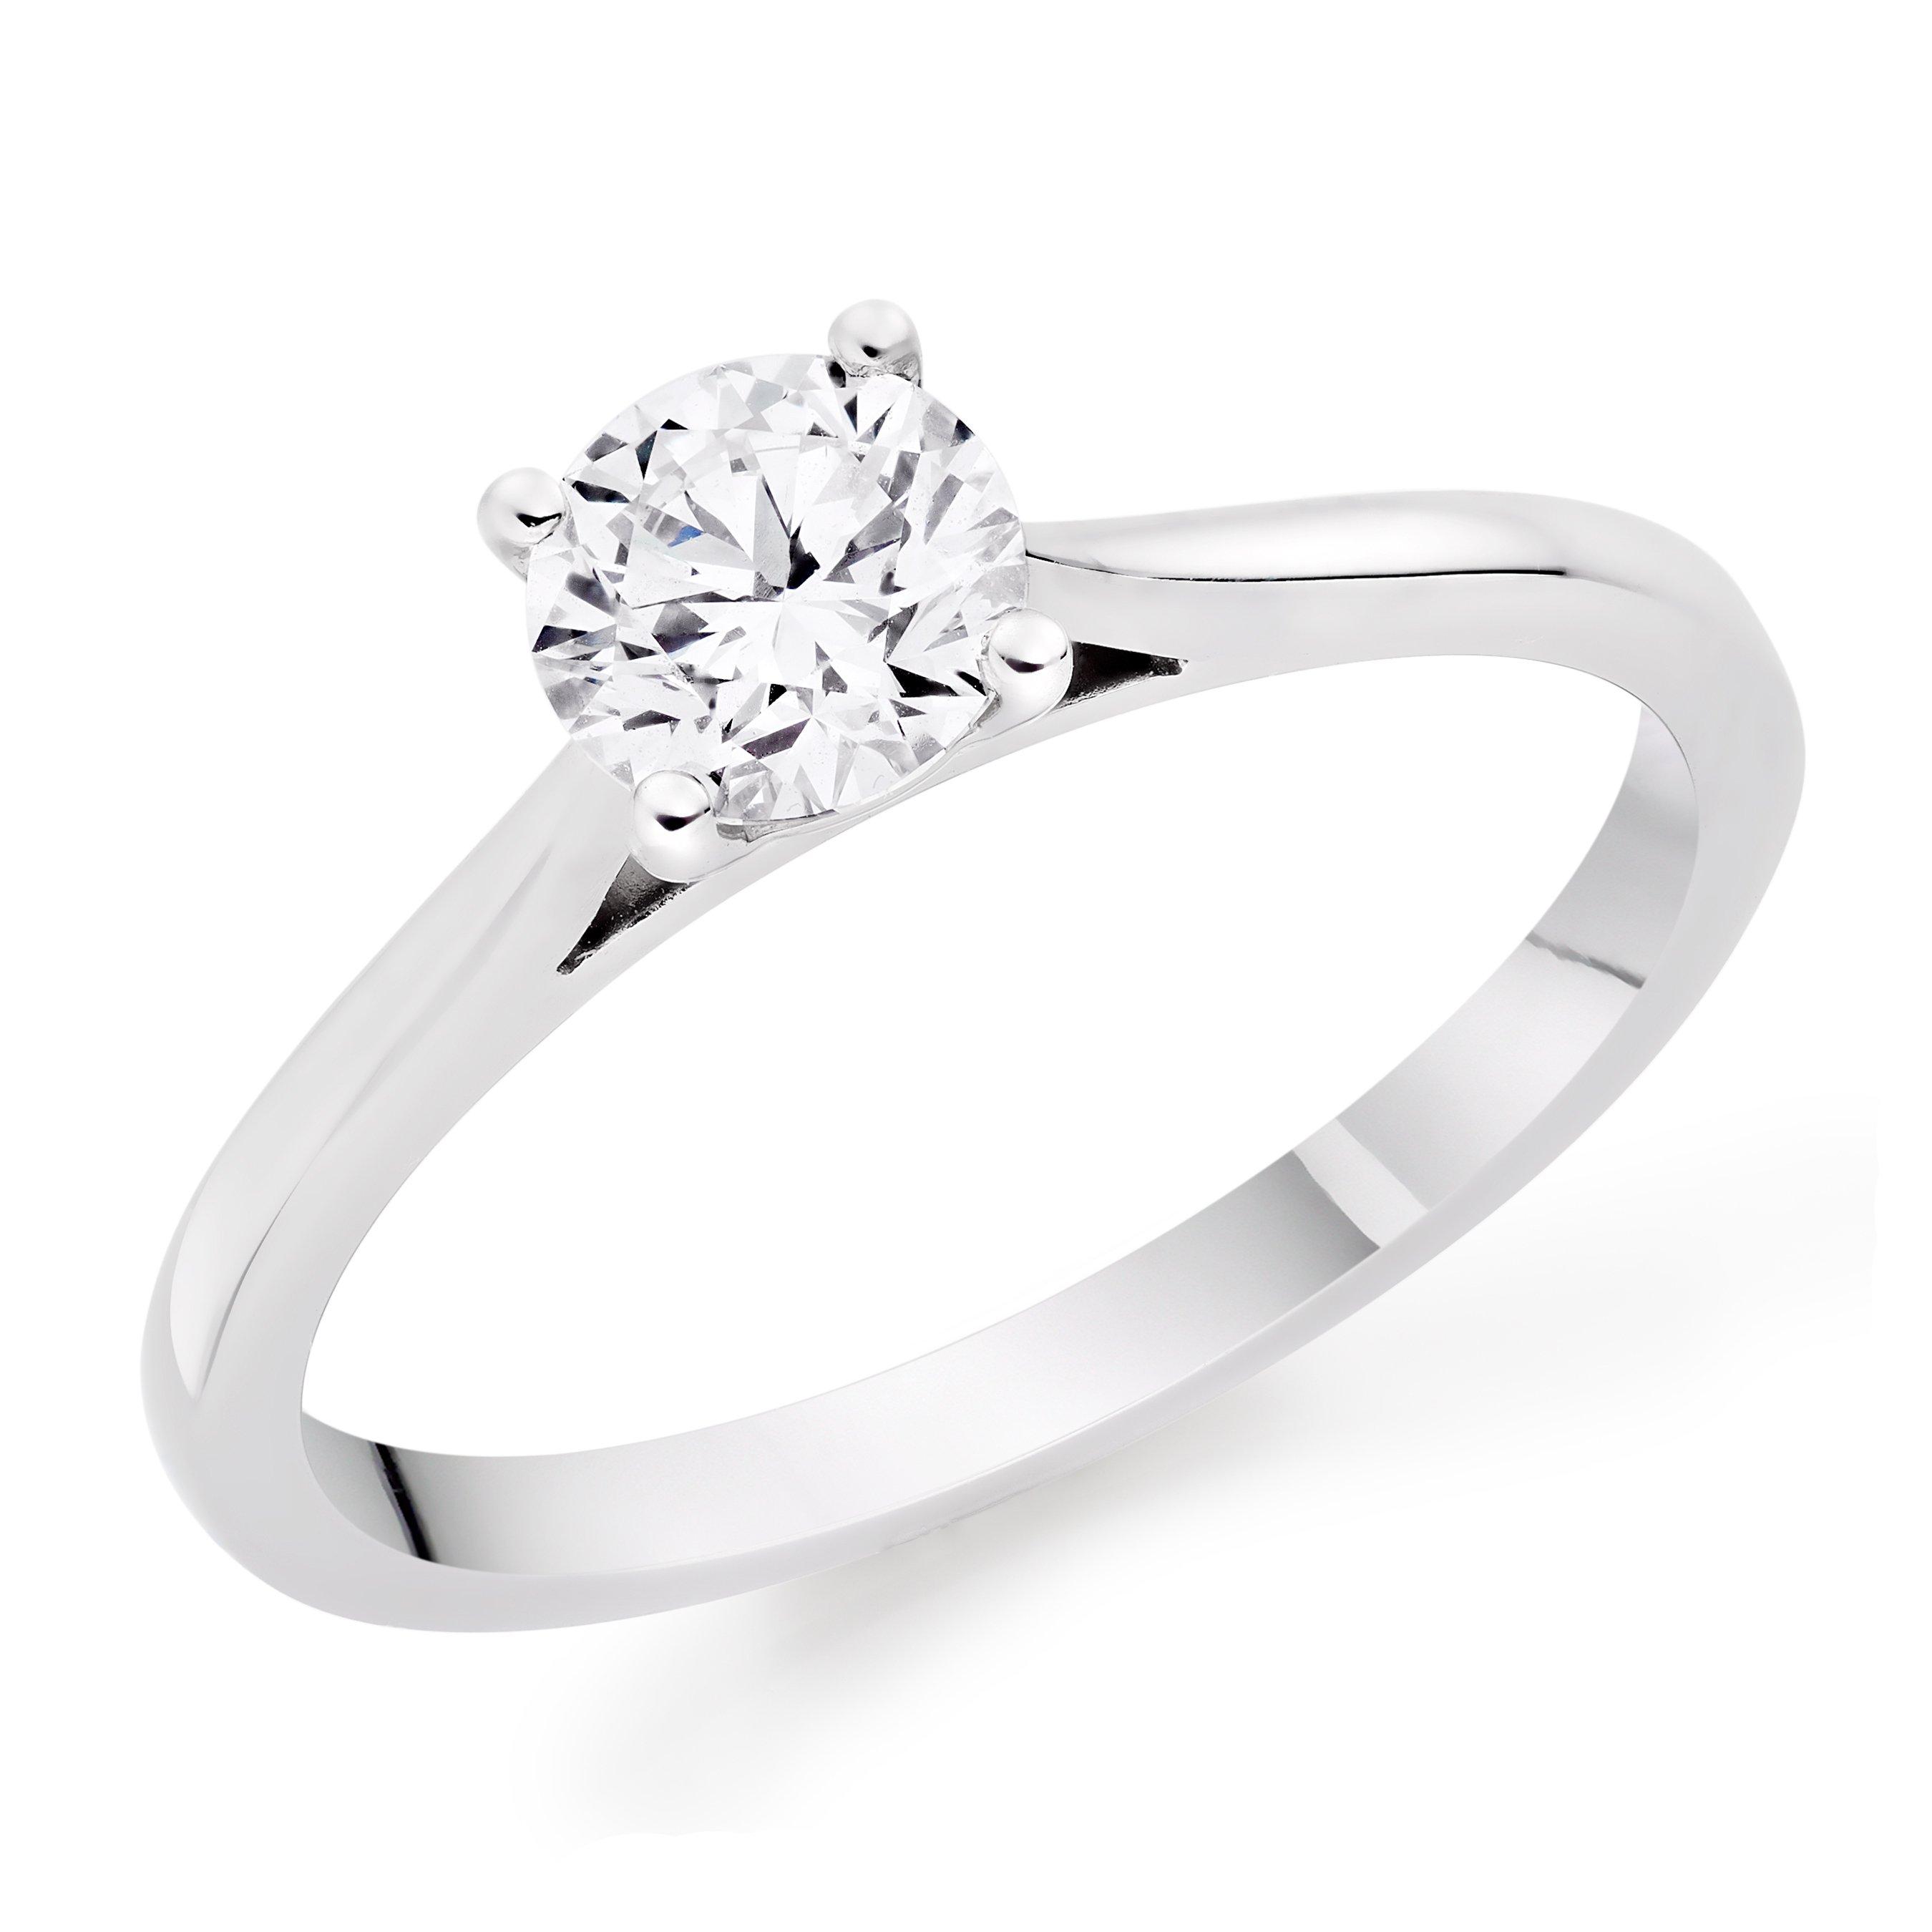 Once Platinum Diamond Solitaire Ring | 0137569 | Beaverbrooks the Jewellers